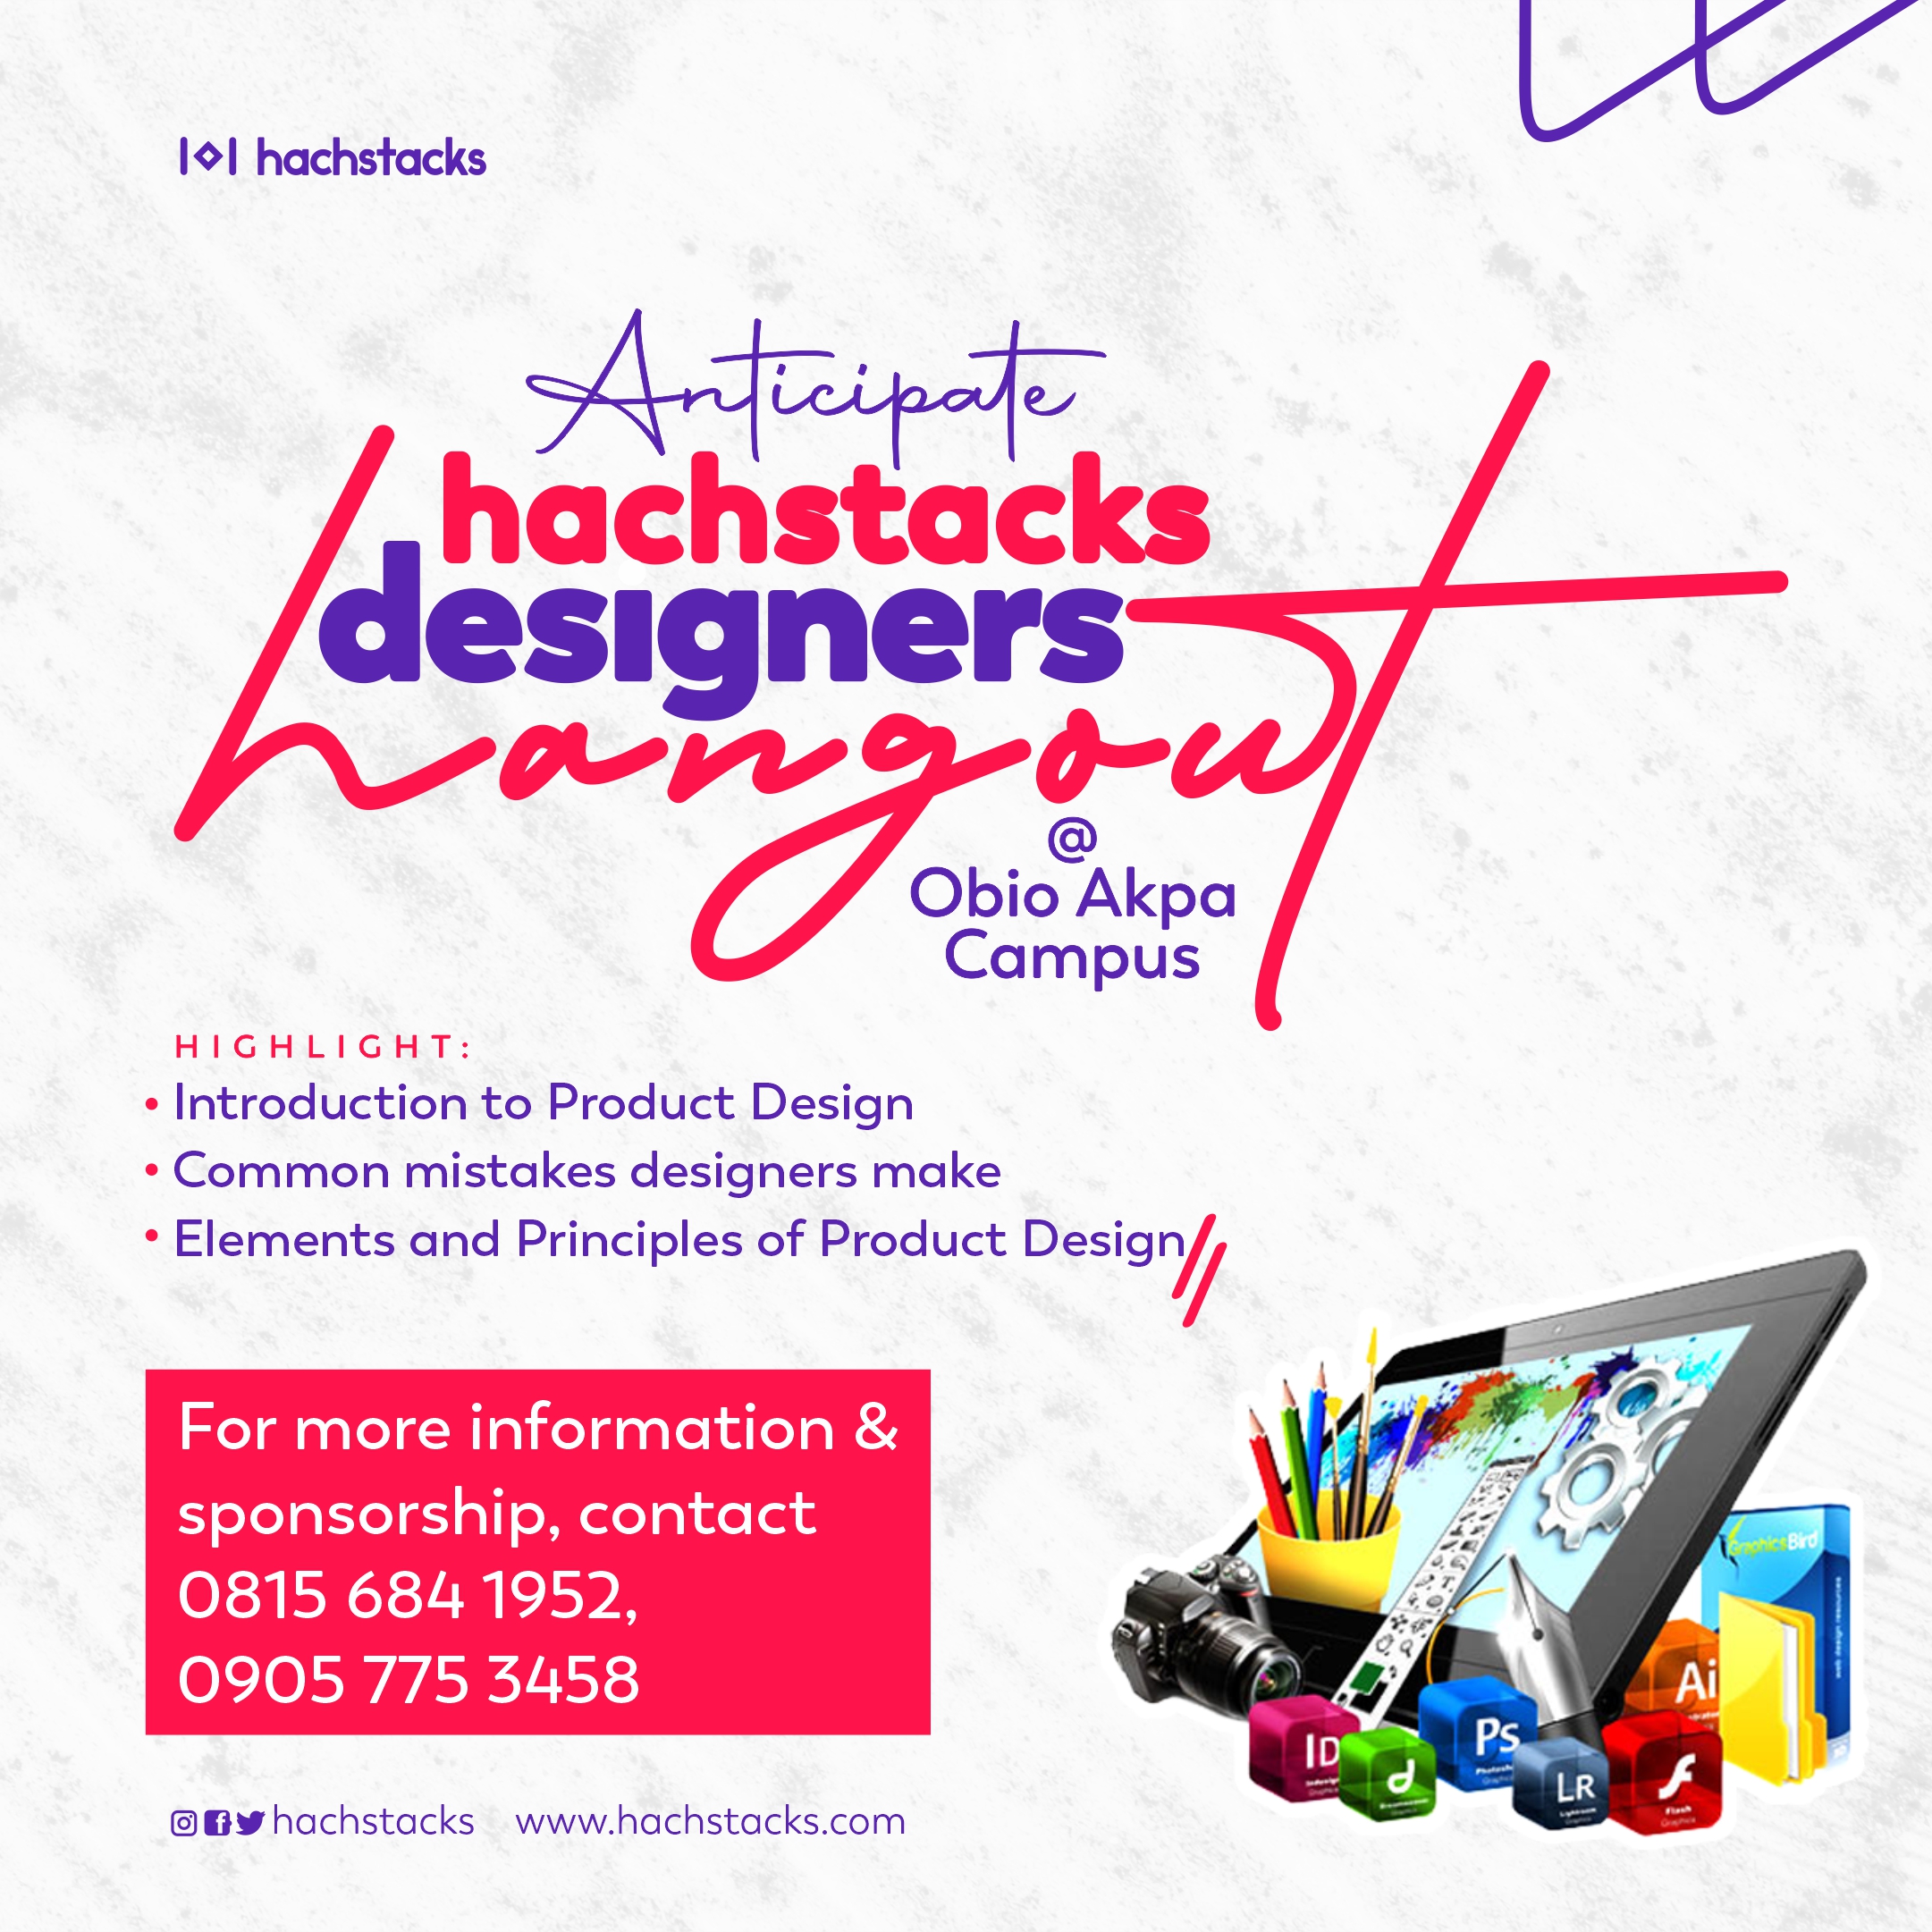 Product Designers Hangout Post free event in Nigeria using tickethub.ng, buy and sell tickets to event